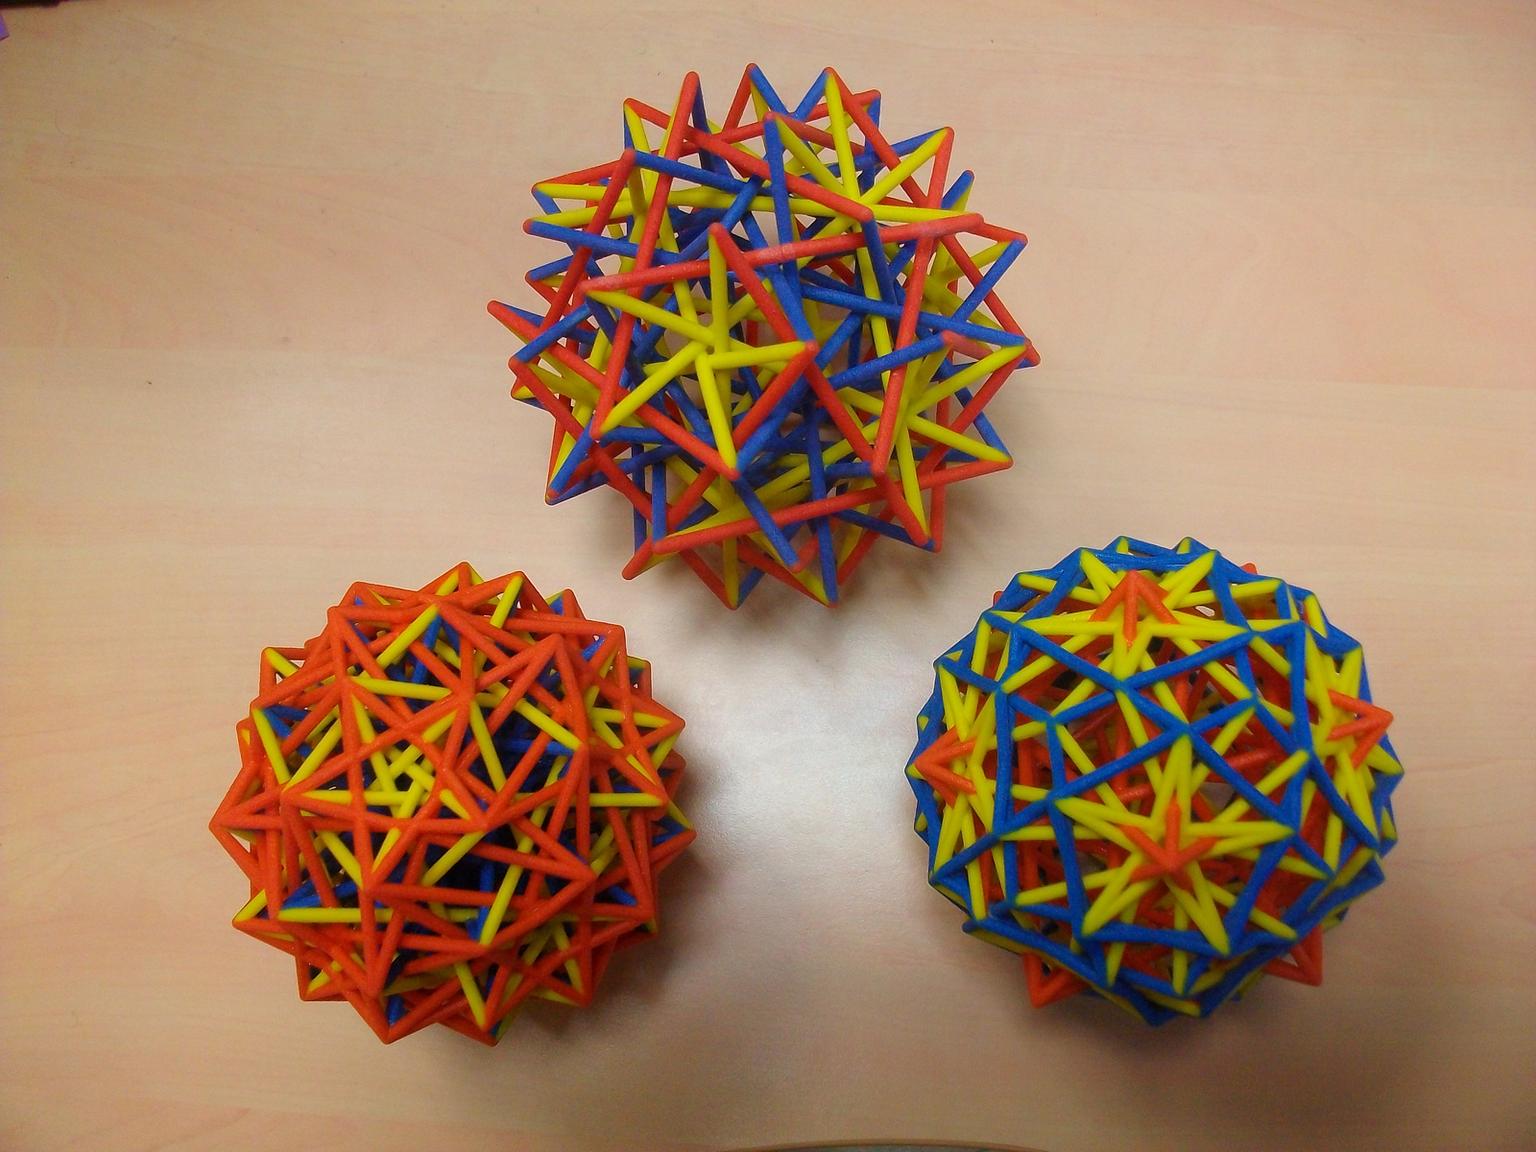 Image for entry 'Exploring the Edges of Polyhedra'